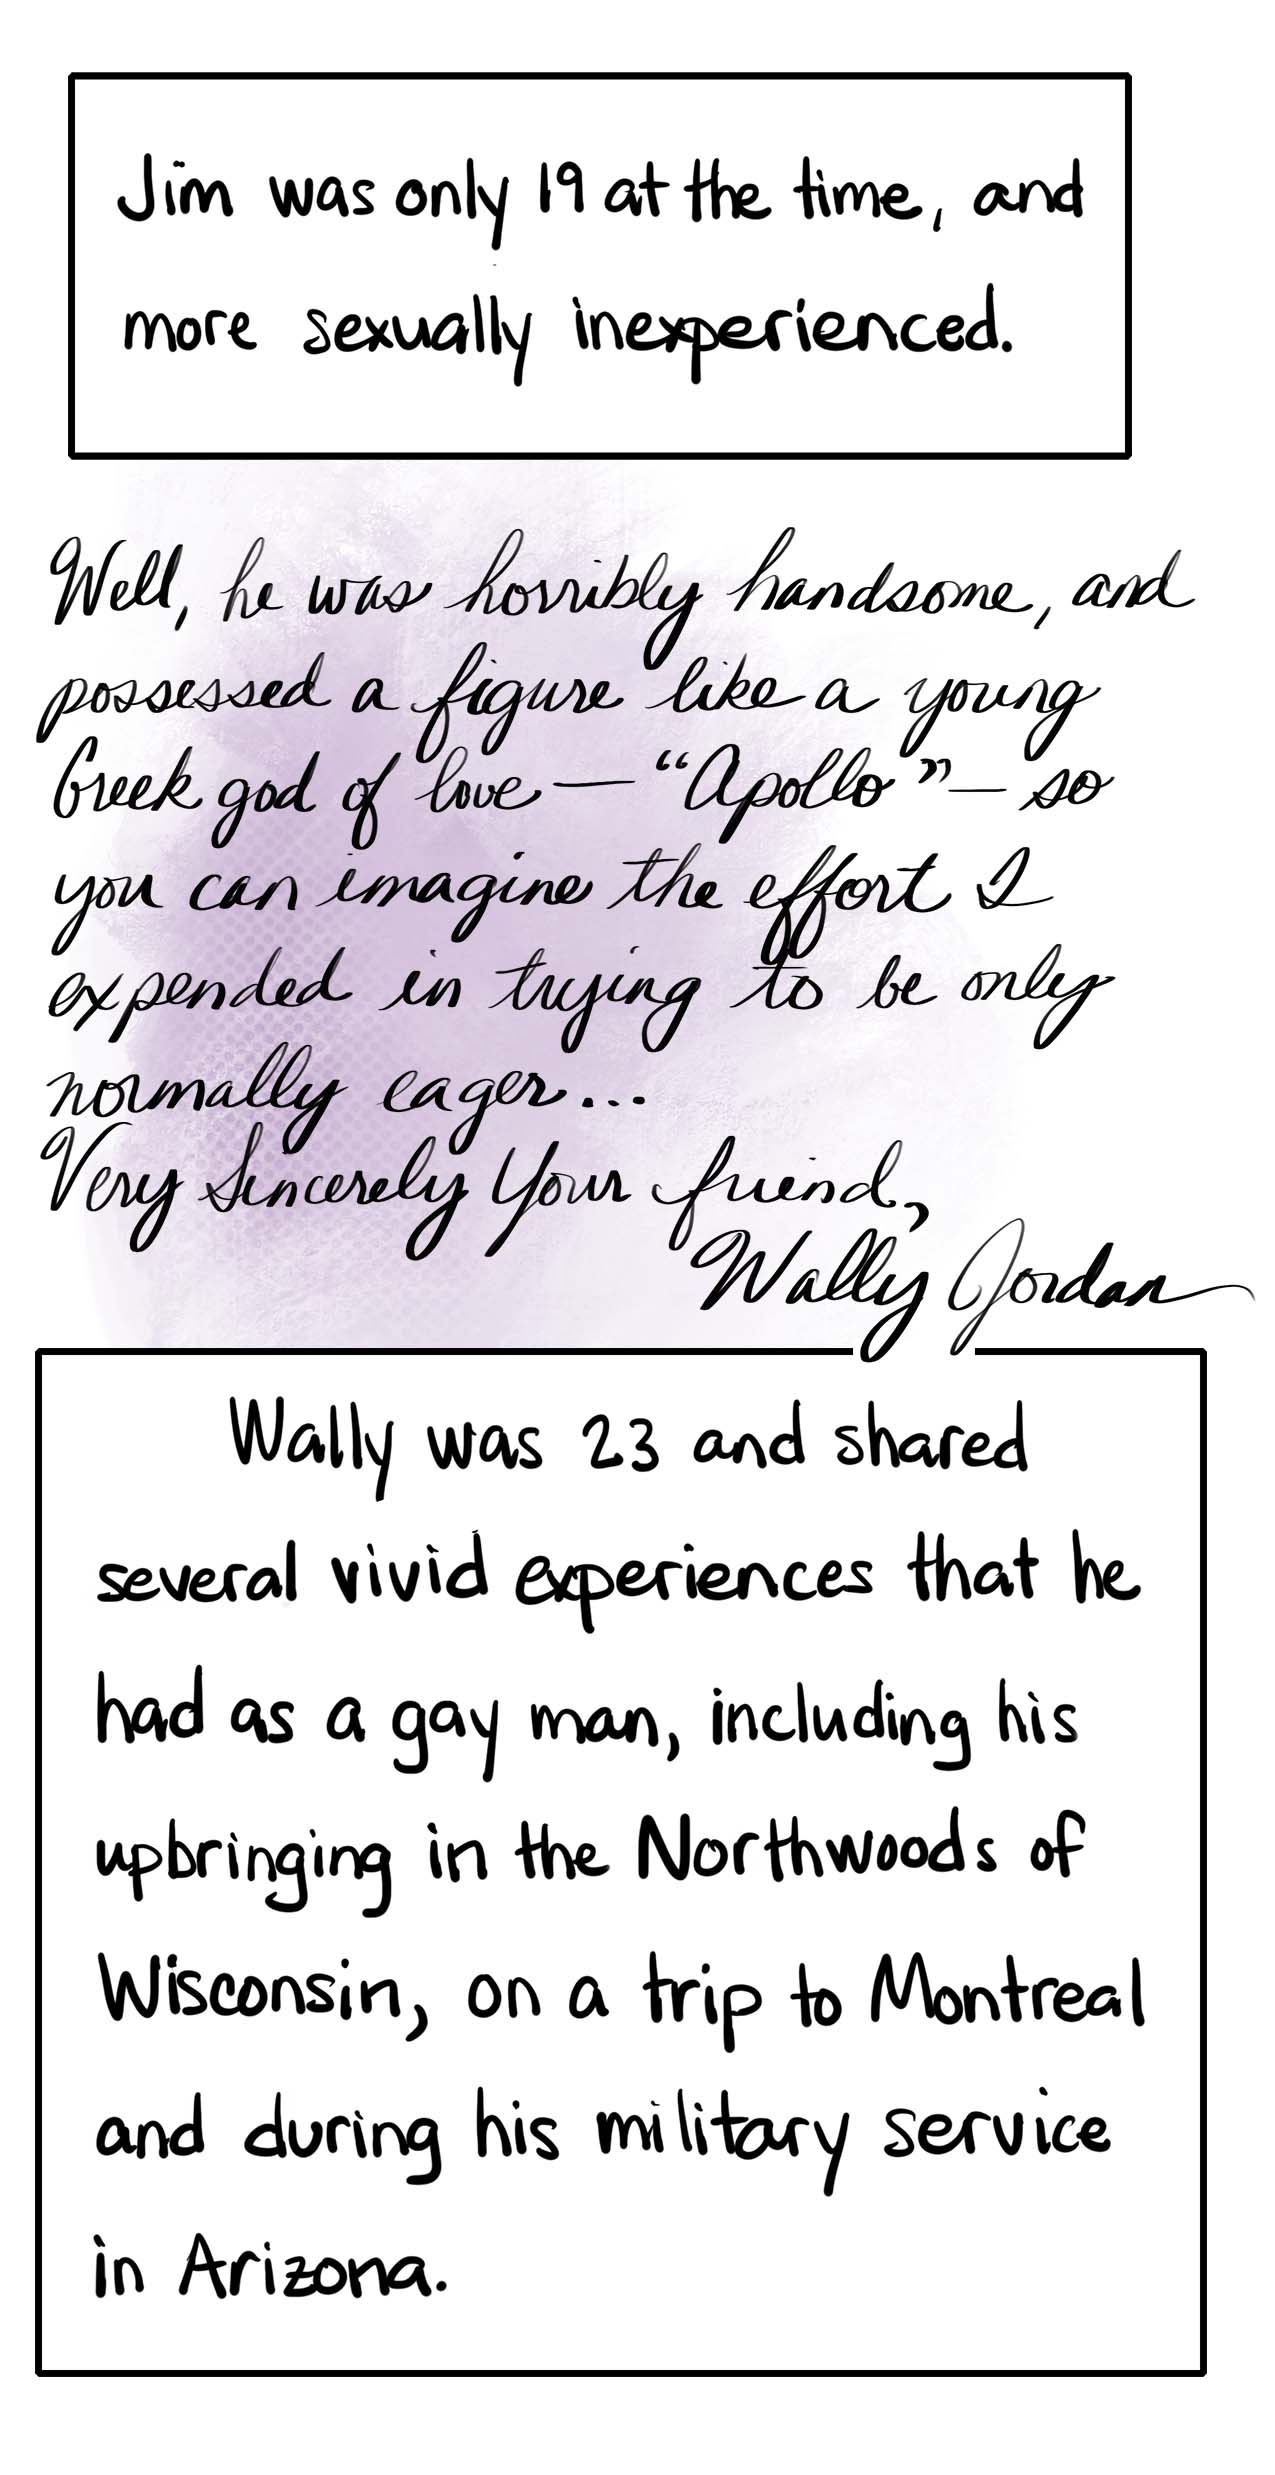 Image: Well, he was horribly handsome, and possessed a figure like a young greek god of love — “Apollo” — so you can imagine the effort I expended in trying to be only normally eager. Text: Jim was only 19 at the time, and more sexually inexperienced. Wally was 23 and shares several vivid experiences that he has had as a gay man, including his upbringing in the Northwoods of Wisconsin, on a trip to Montreal and during his military service in Arizona.